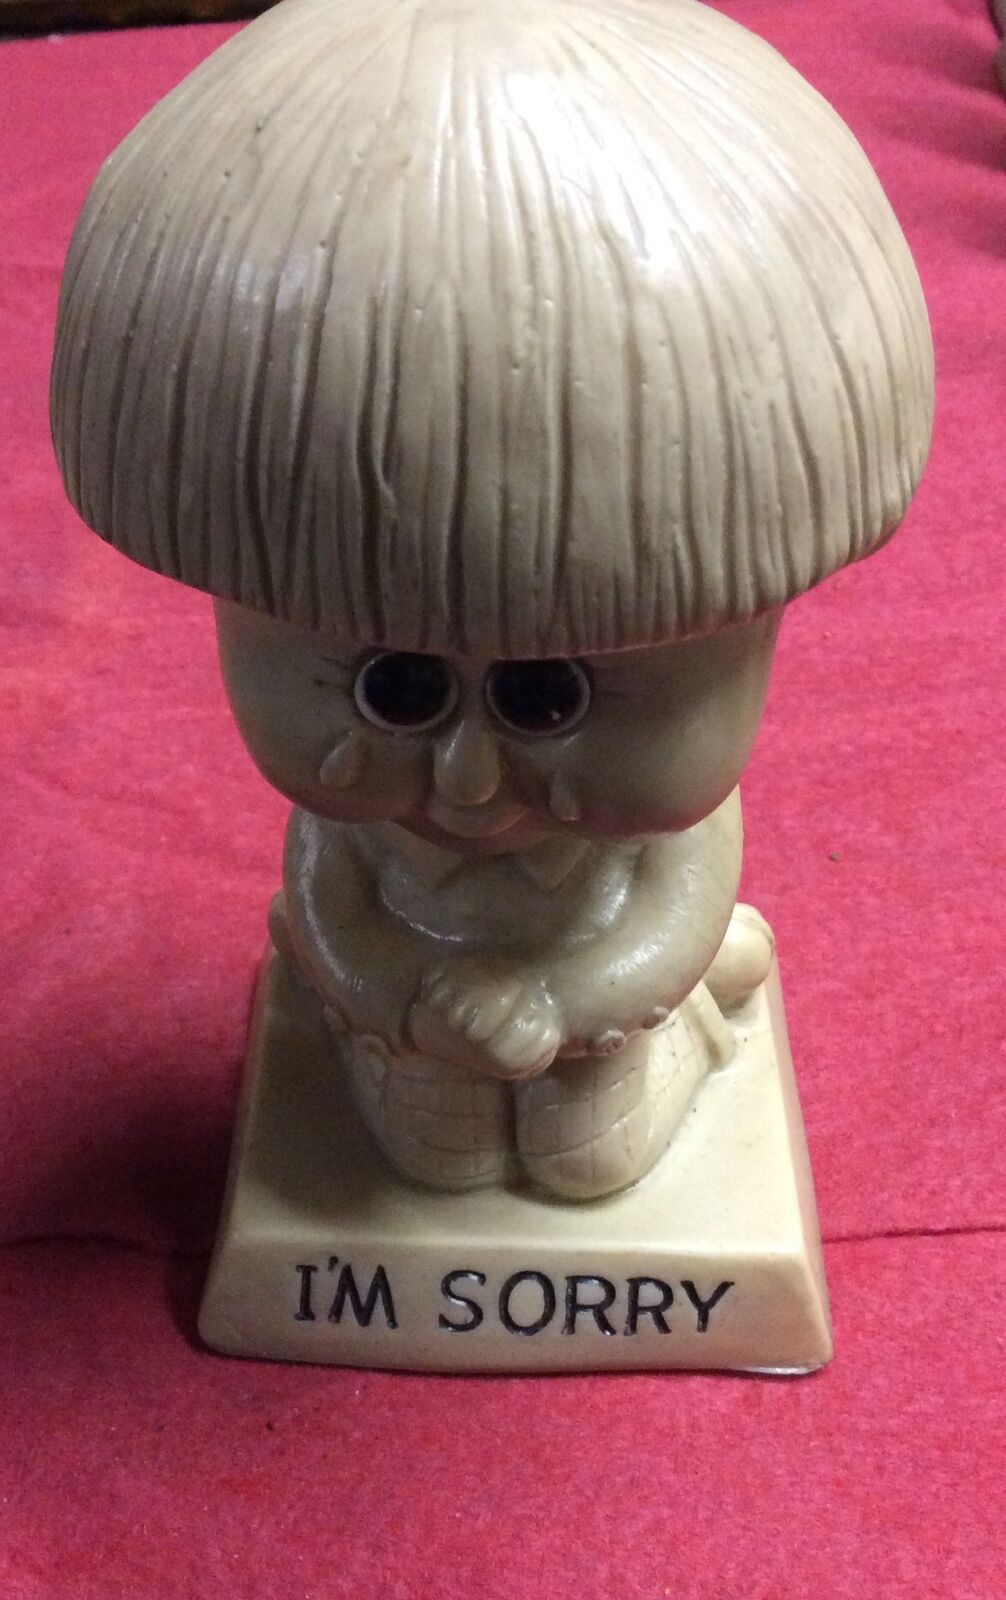 Vintage 1970 Russ Berrie  I'm Sorry Figurine. Made In U.S.A